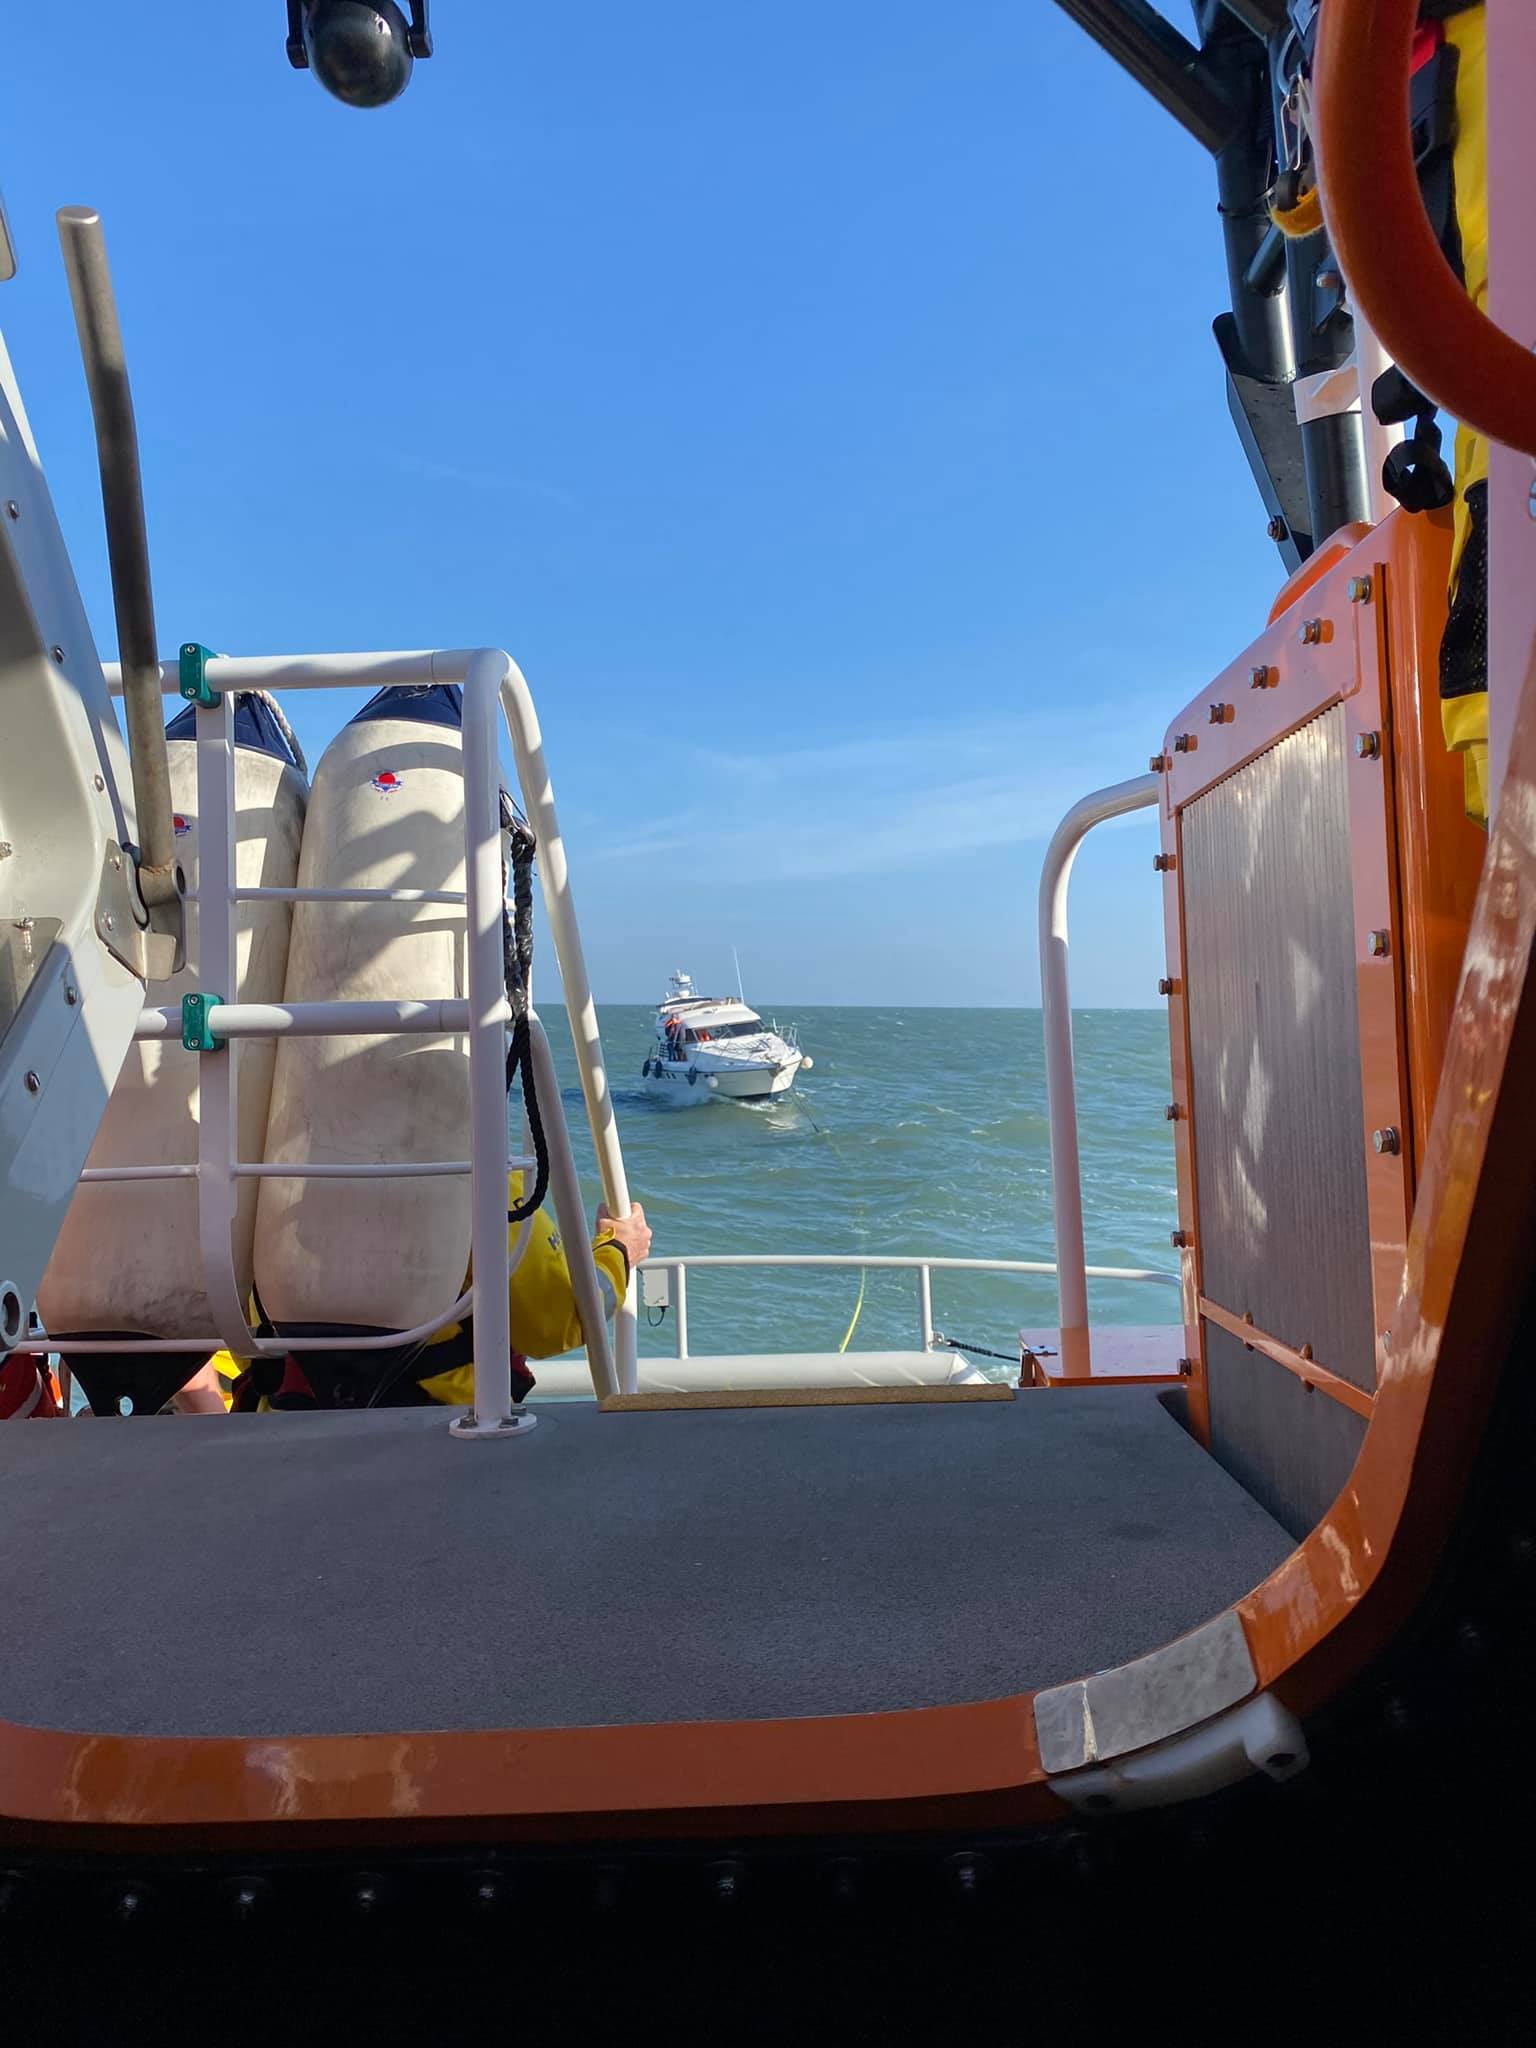 Credit: Mumbles RNLI Lifeboat assisting a motorboat with engine difficulties on Easter Sunday